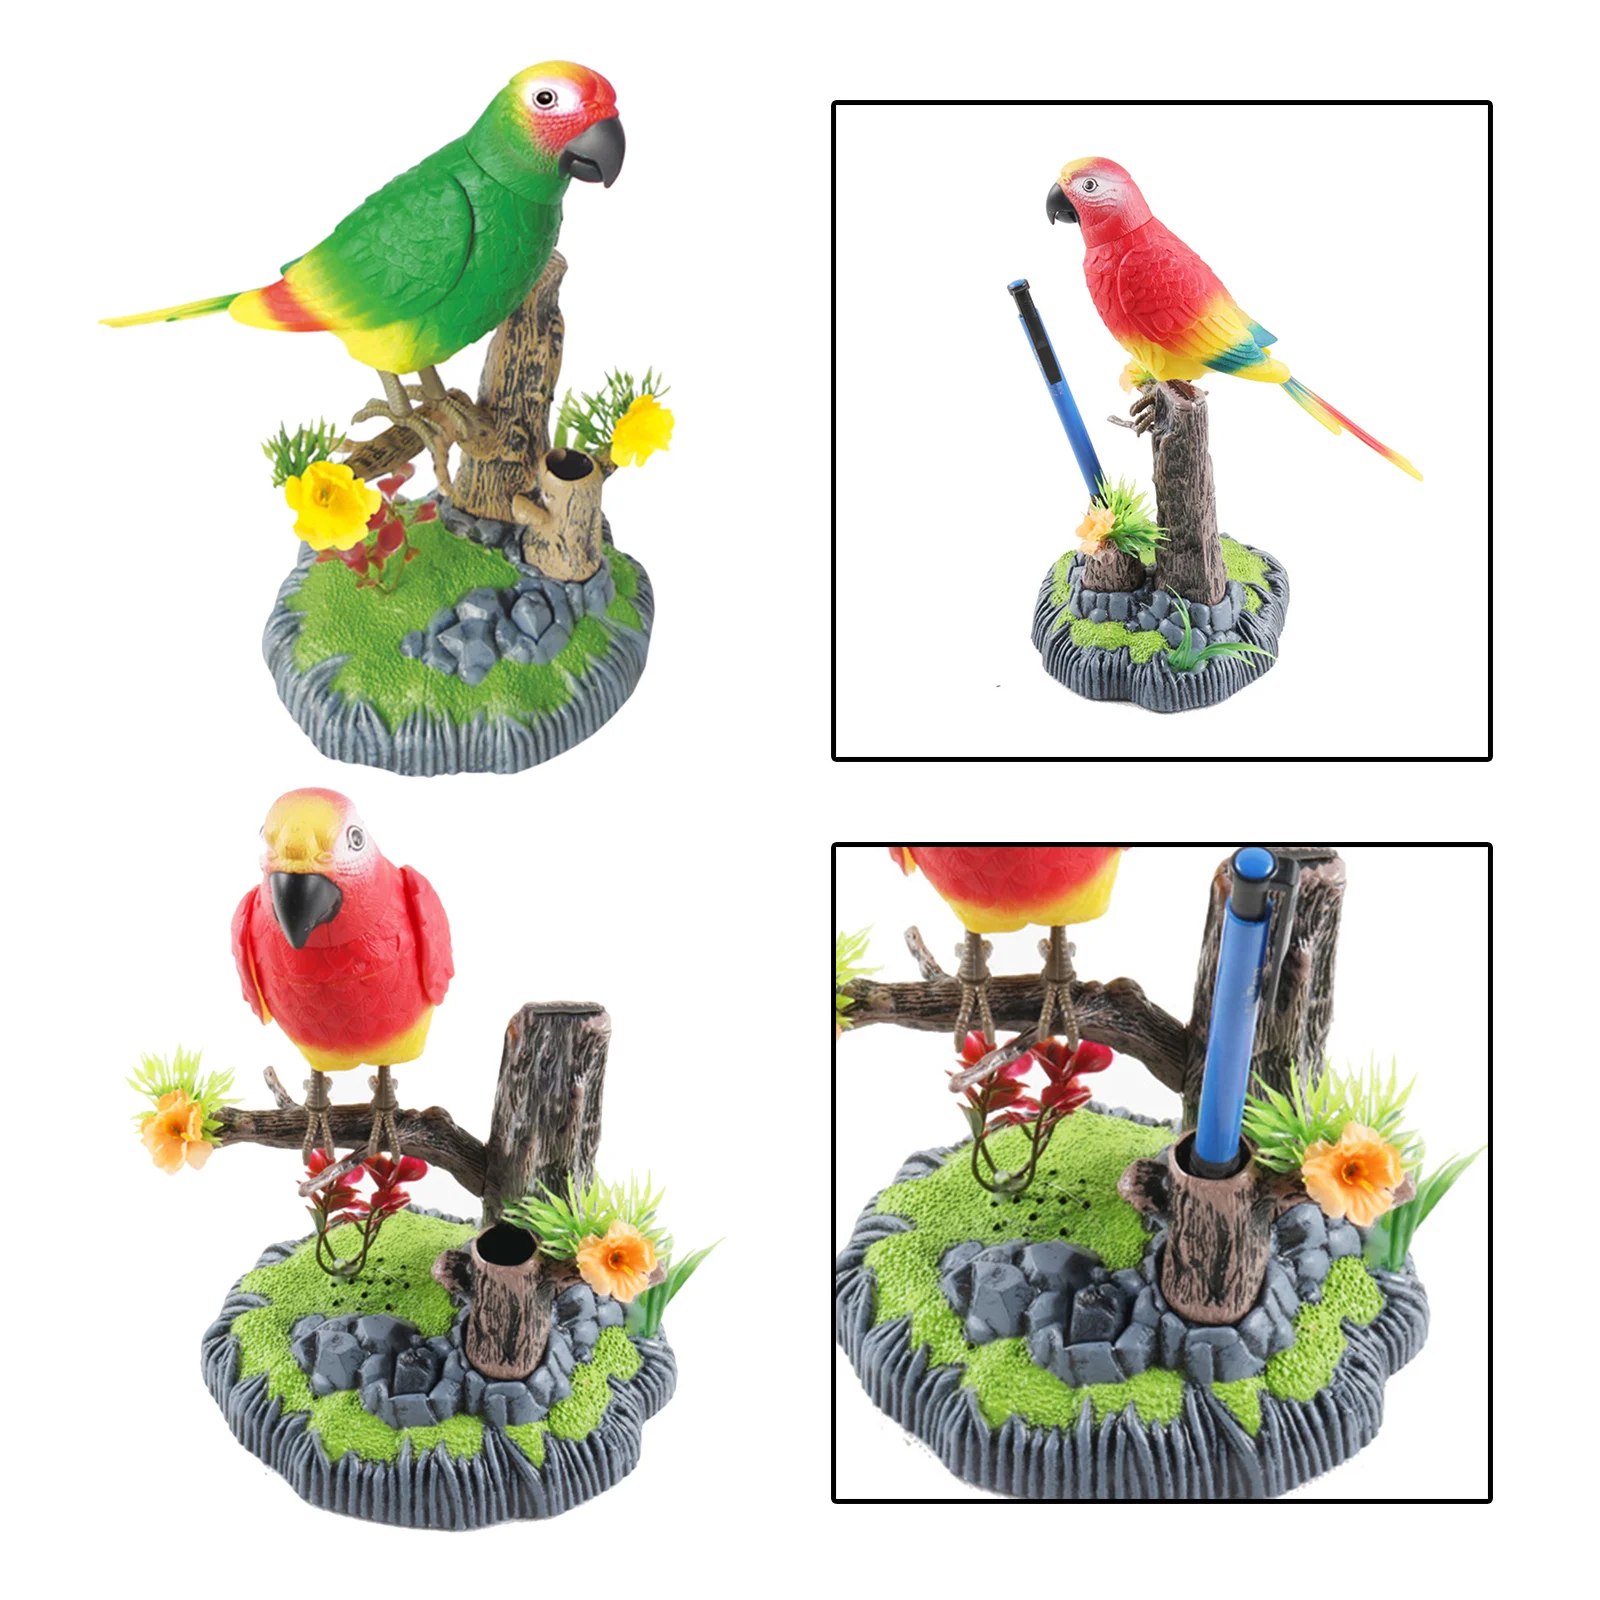 Authentic Electronic Pet Toy Cute Plastic Educational Chirping Bird for Office Decor Garden Decor Home Ornament Children